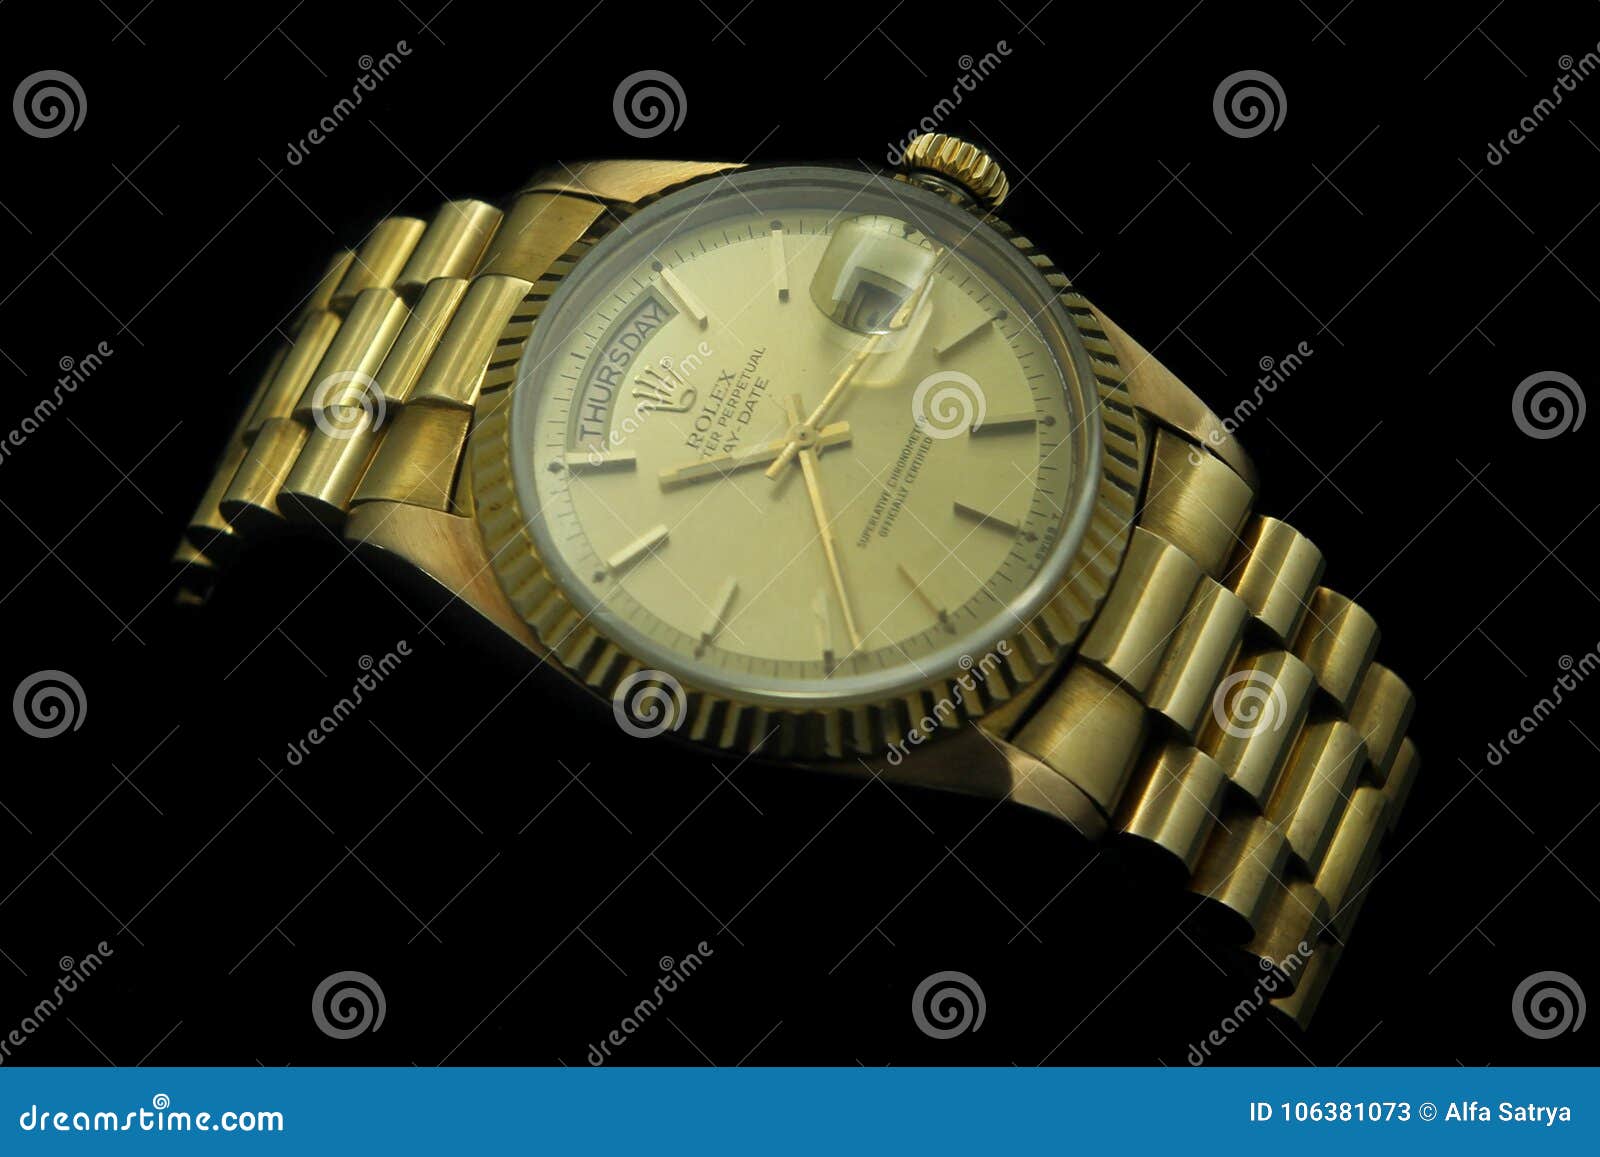 all gold datejust